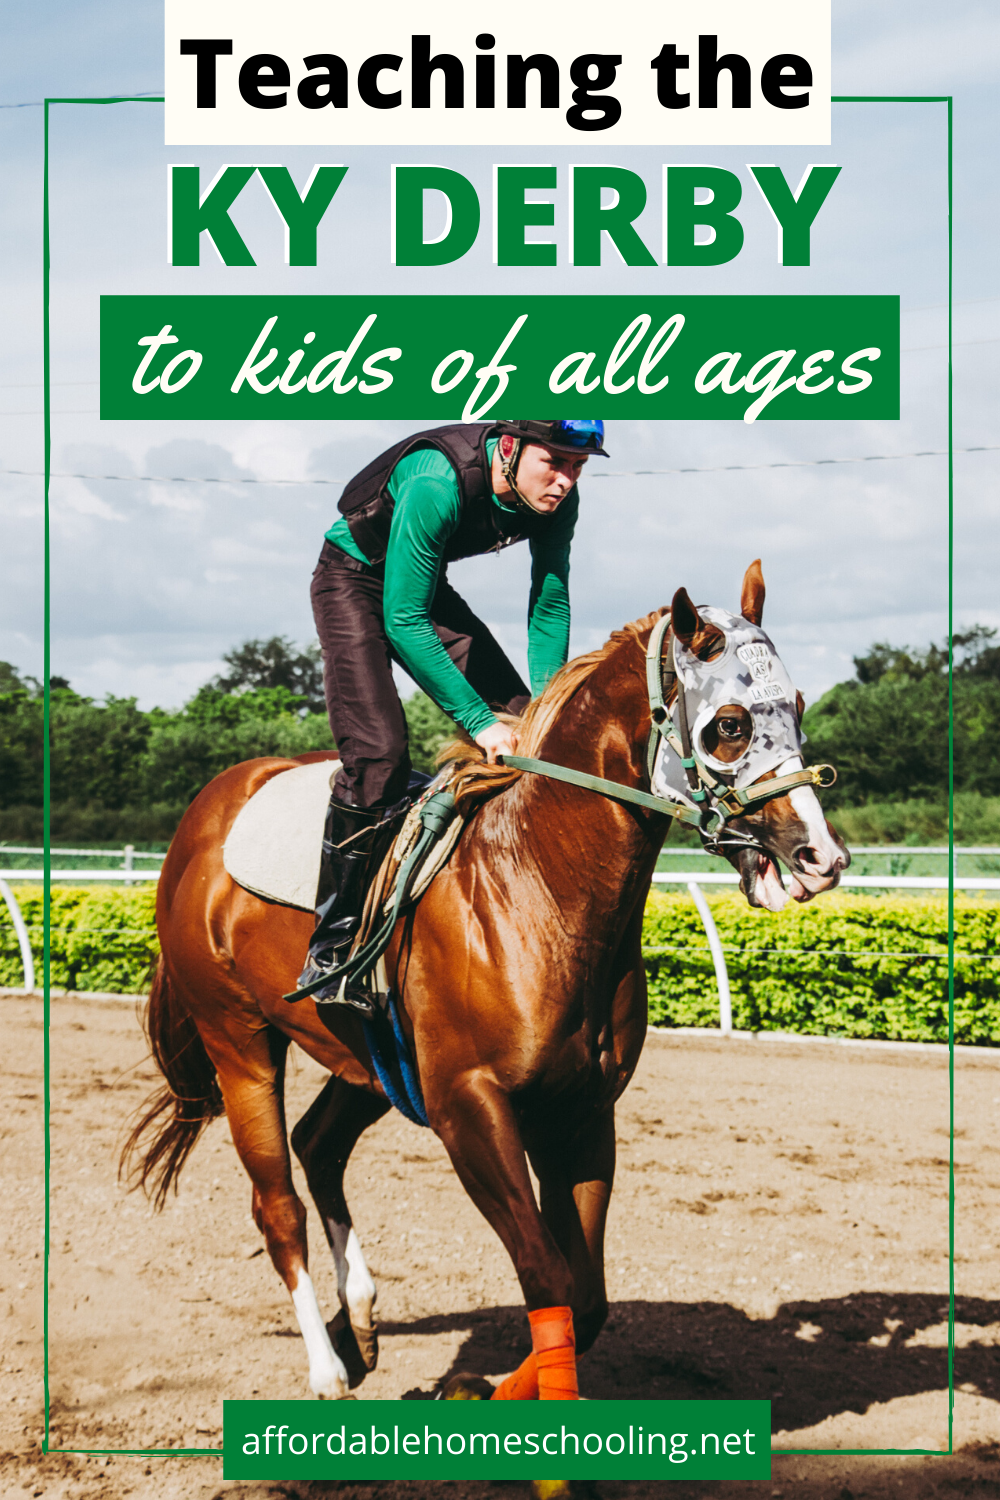 Each year on the first Saturday of May, people around the country celebrate the Kentucky Derby. Teach kids about it with these Kentucky Derby activities for kids.